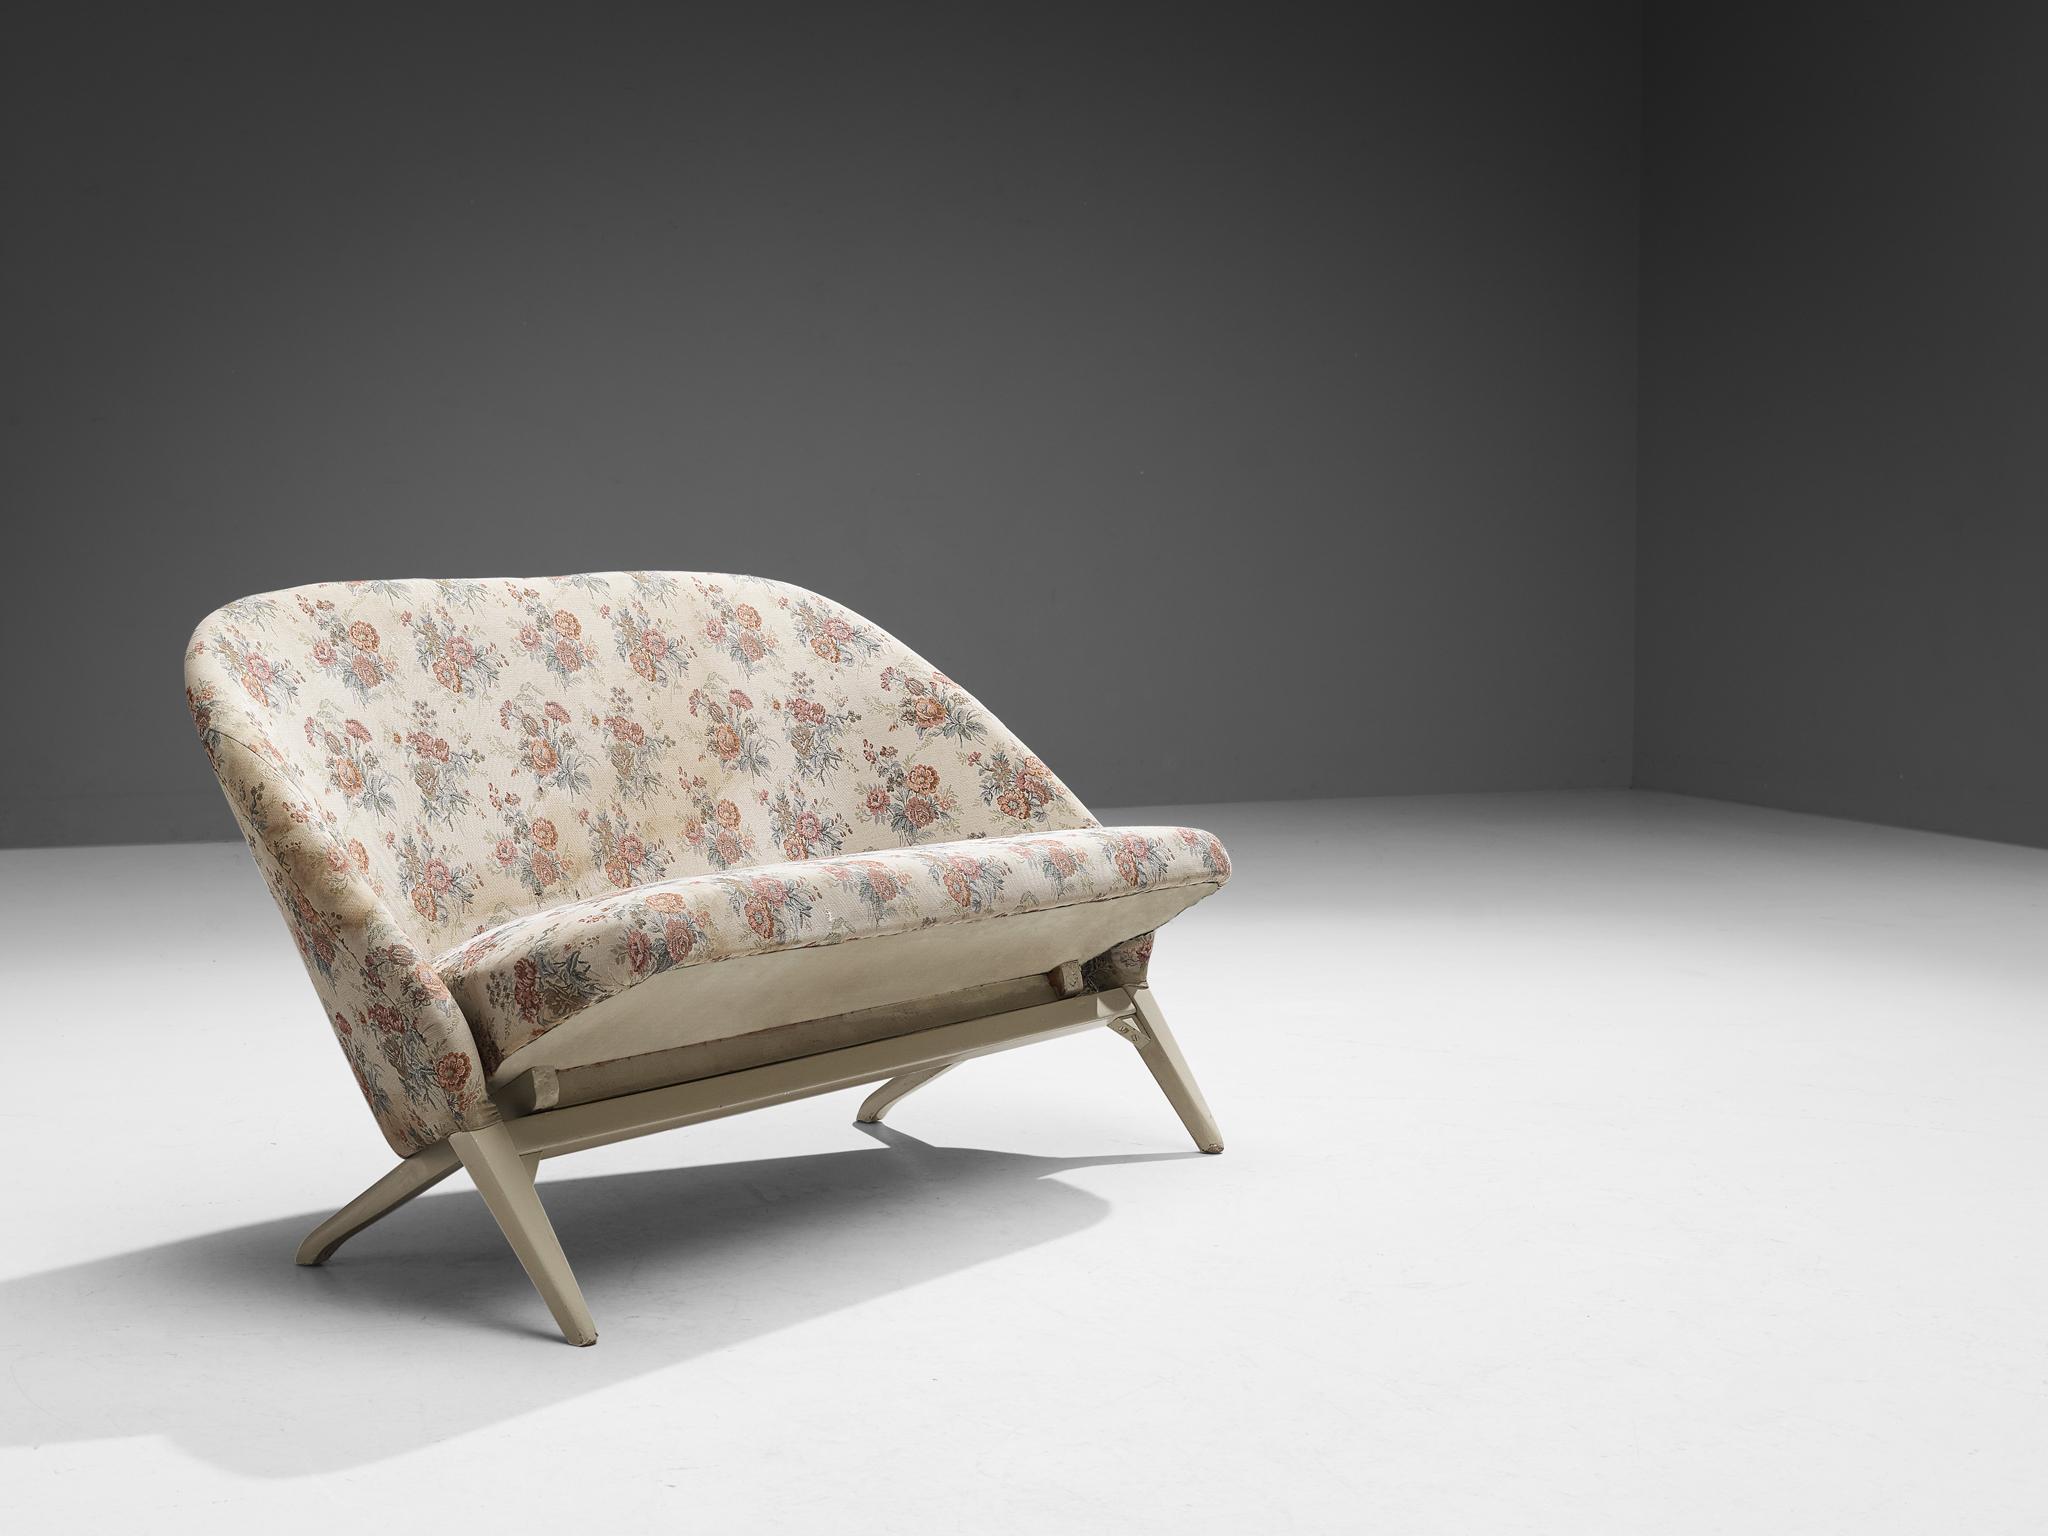 Theo Ruth for Artifort, Settee, model 'Congo', lacquered wood, fabric, The Netherlands, 1950s. 

A Dutch settee designed by Theo Ruth in a romantic floral print fabric . This 'Congo' sofa's design, as well as the chairs of this serie, is based on